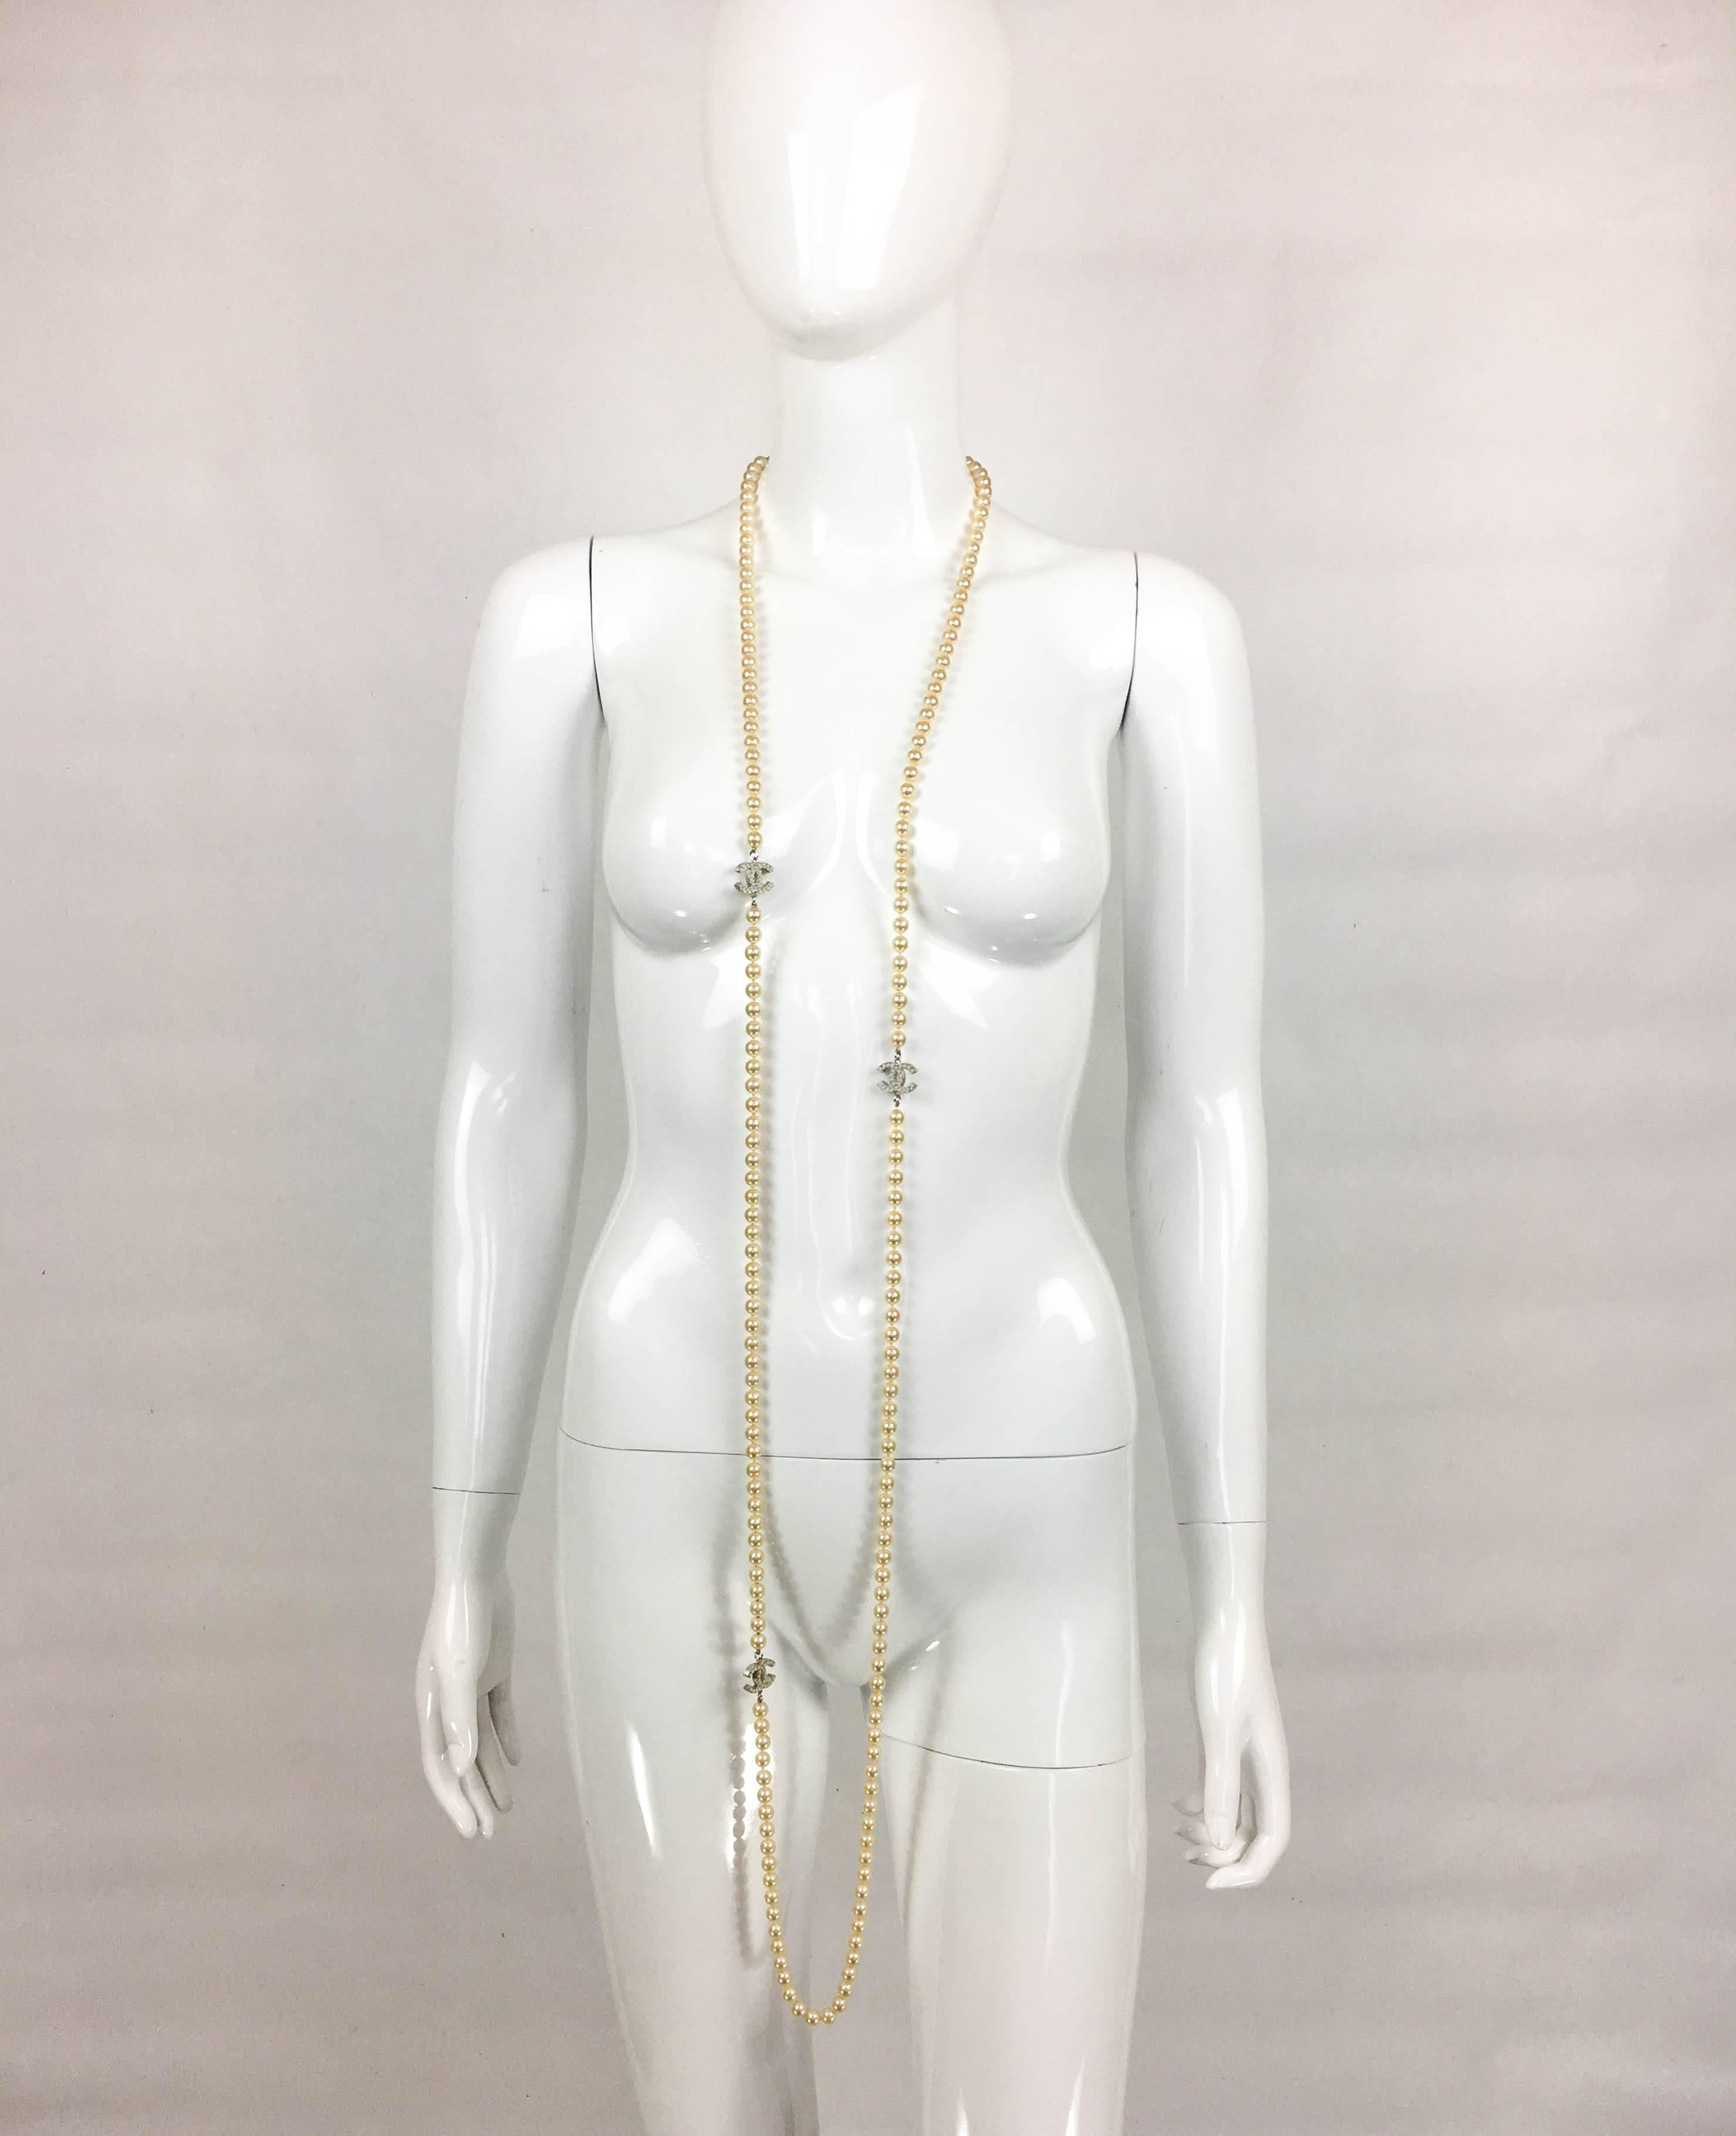 2008 Chanel Long Pearl Sautoir Necklace with 3 Inset Pearl 'CC' Logos 2